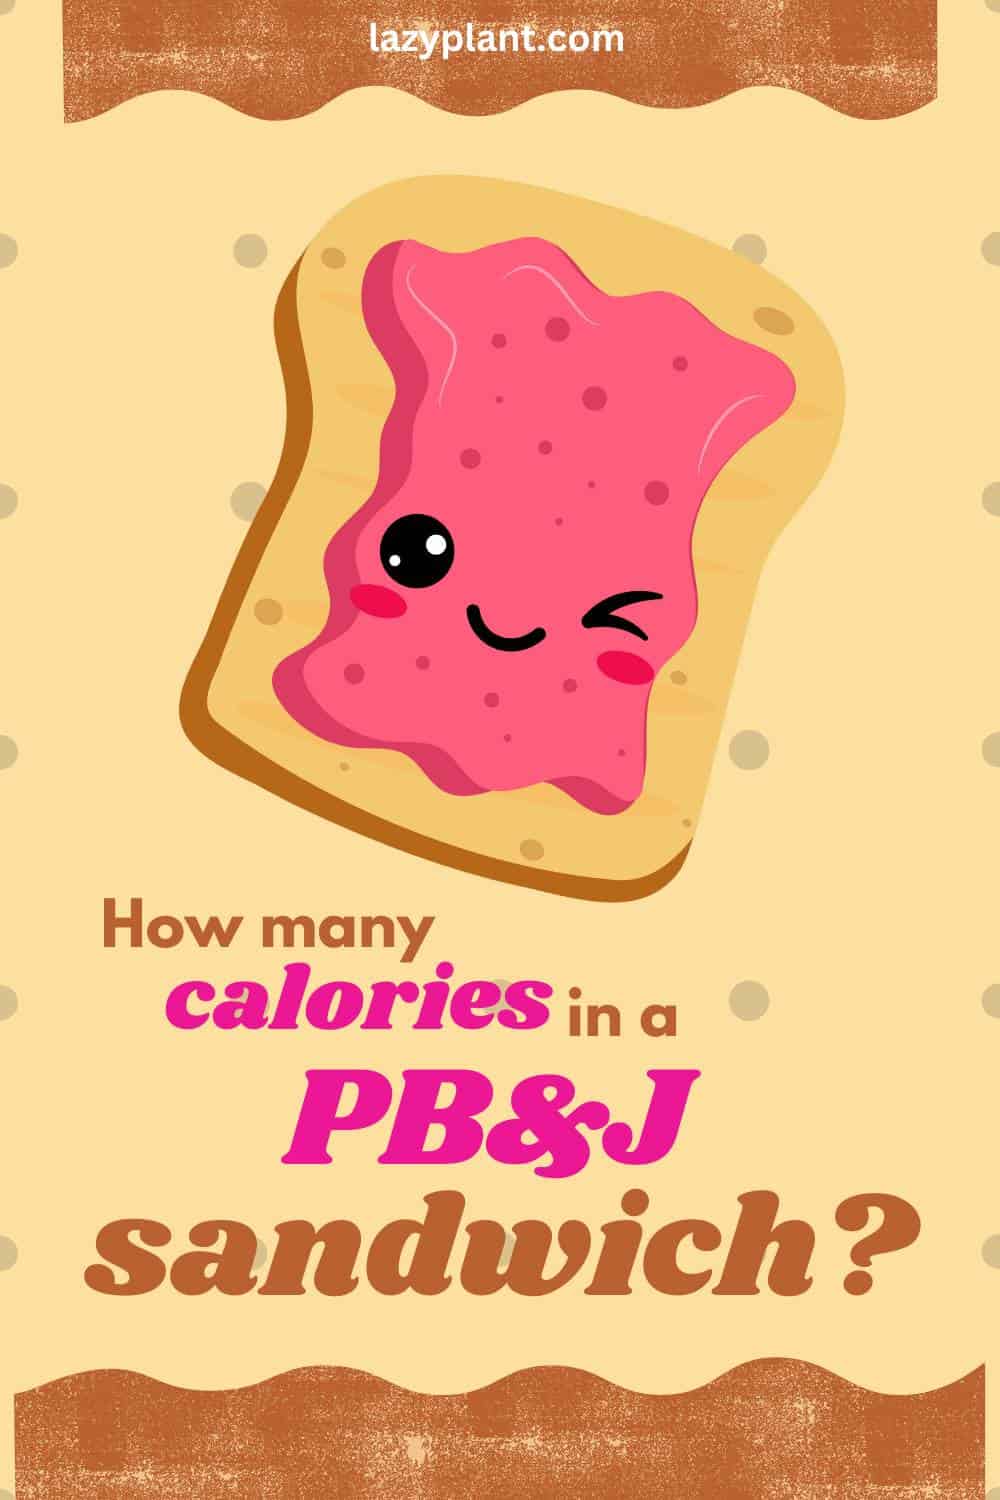 How to eat a PB&J sandwich to consume up to 80% fewer calories?